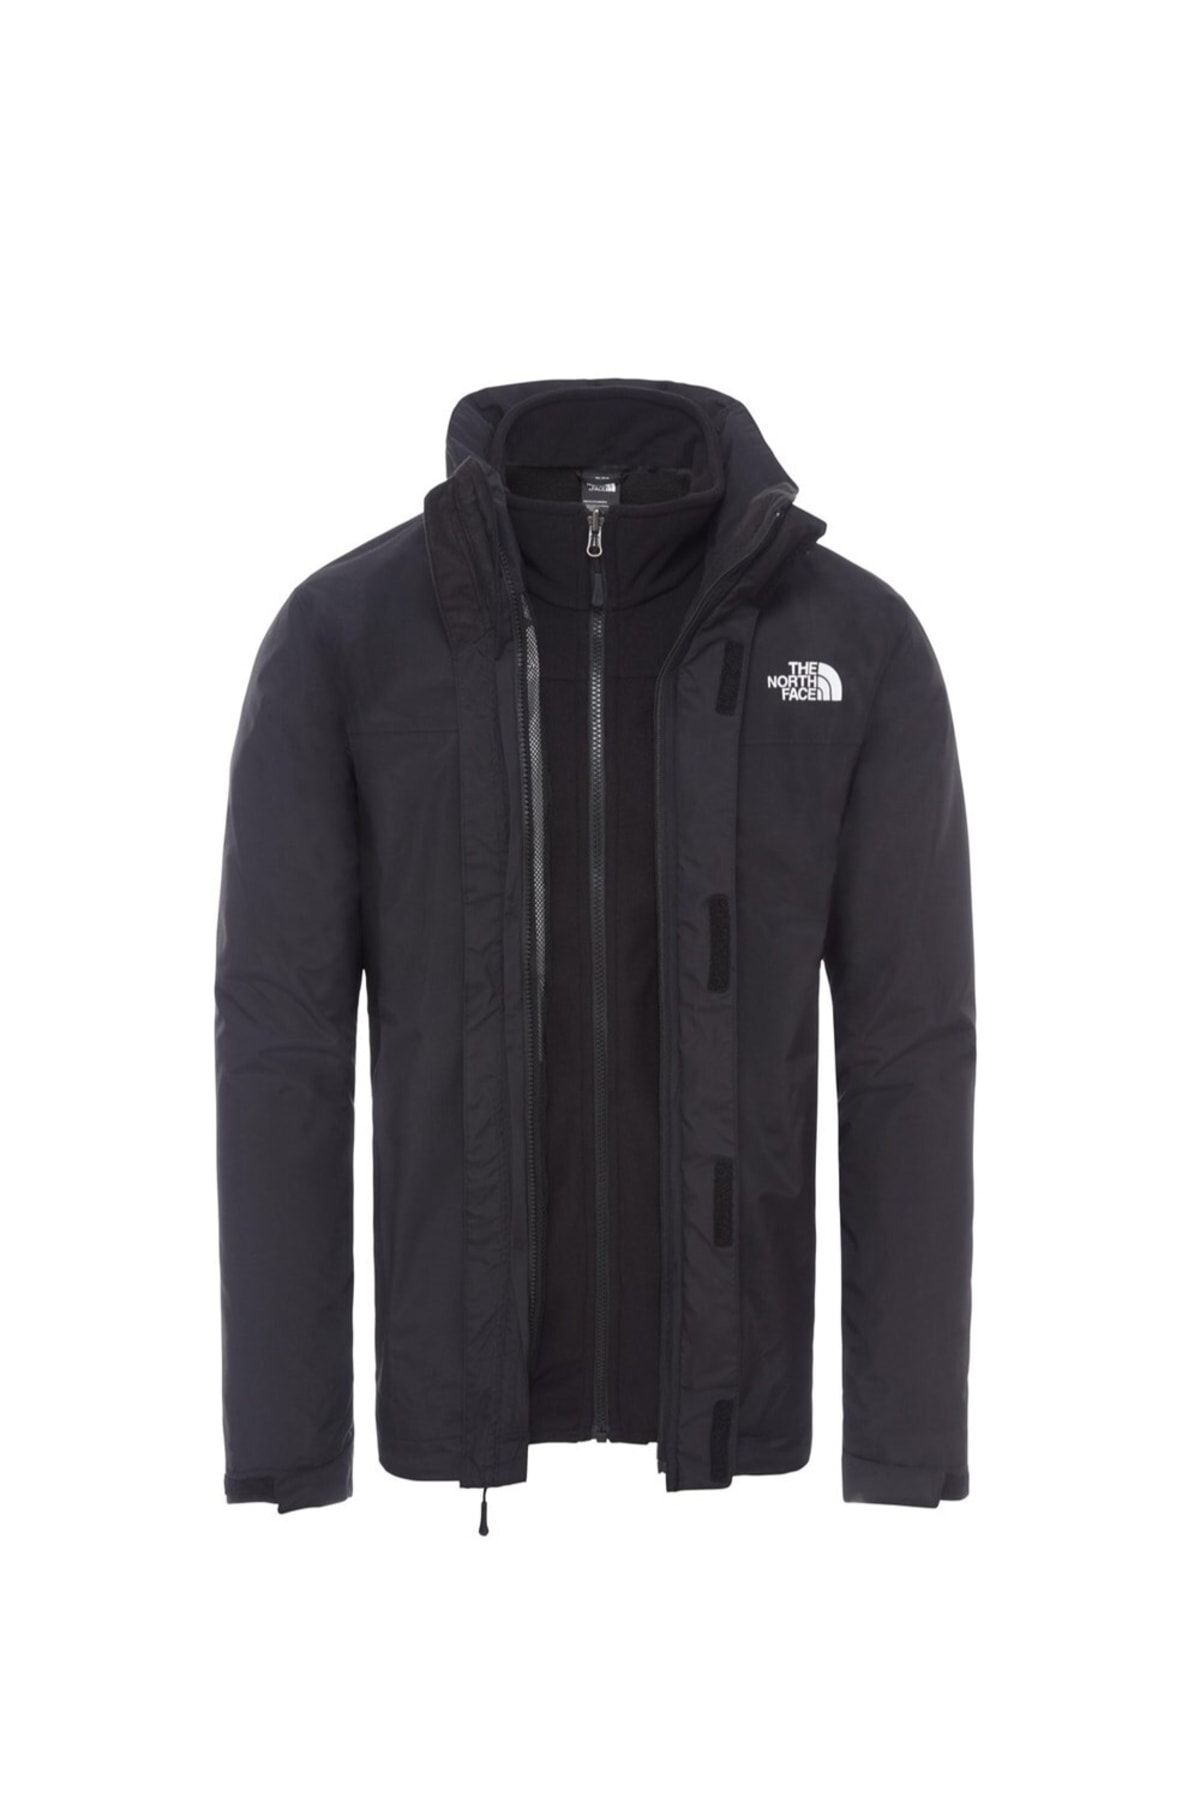 The North Face The Nort Face New Original Triclimate Erkek Mont